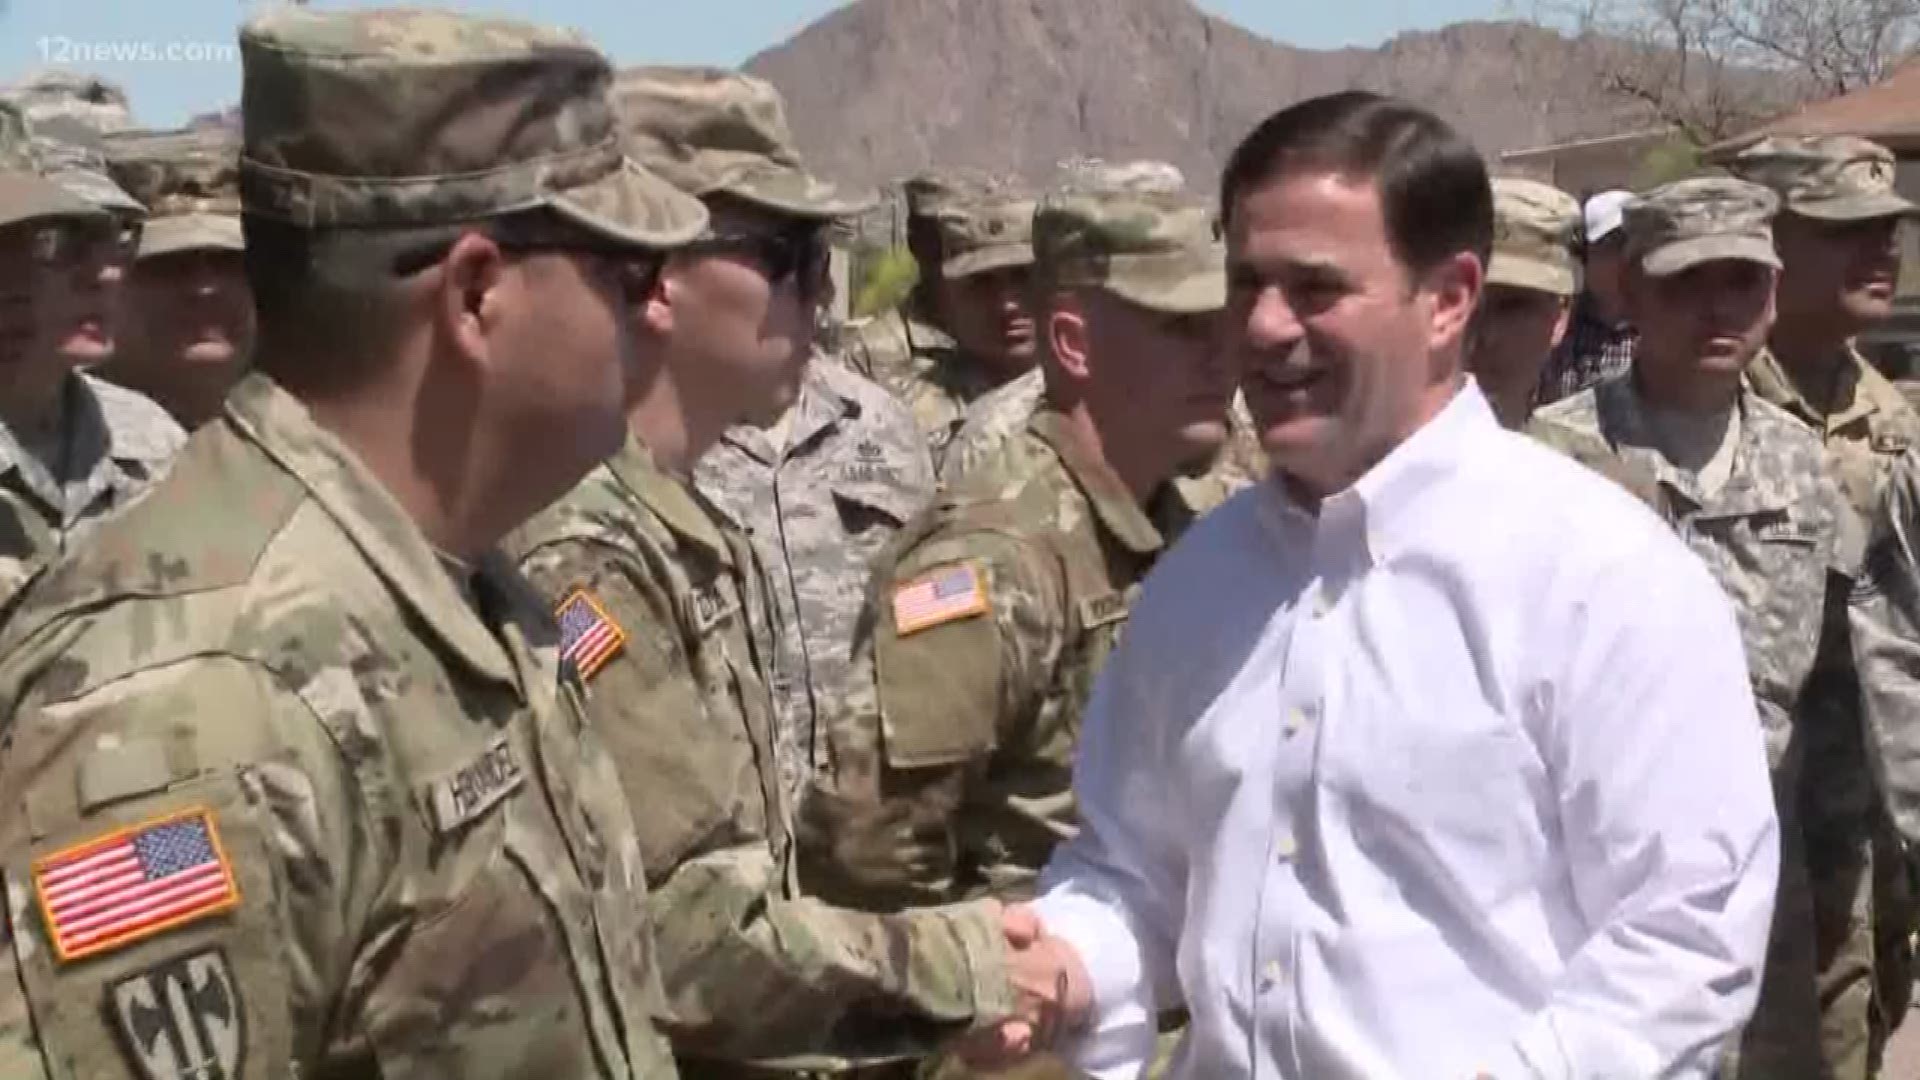 Gov. Ducey said the troops would be stationed in the Tucson and Yuma sectors. He said more National Guard members would be deployed this week.